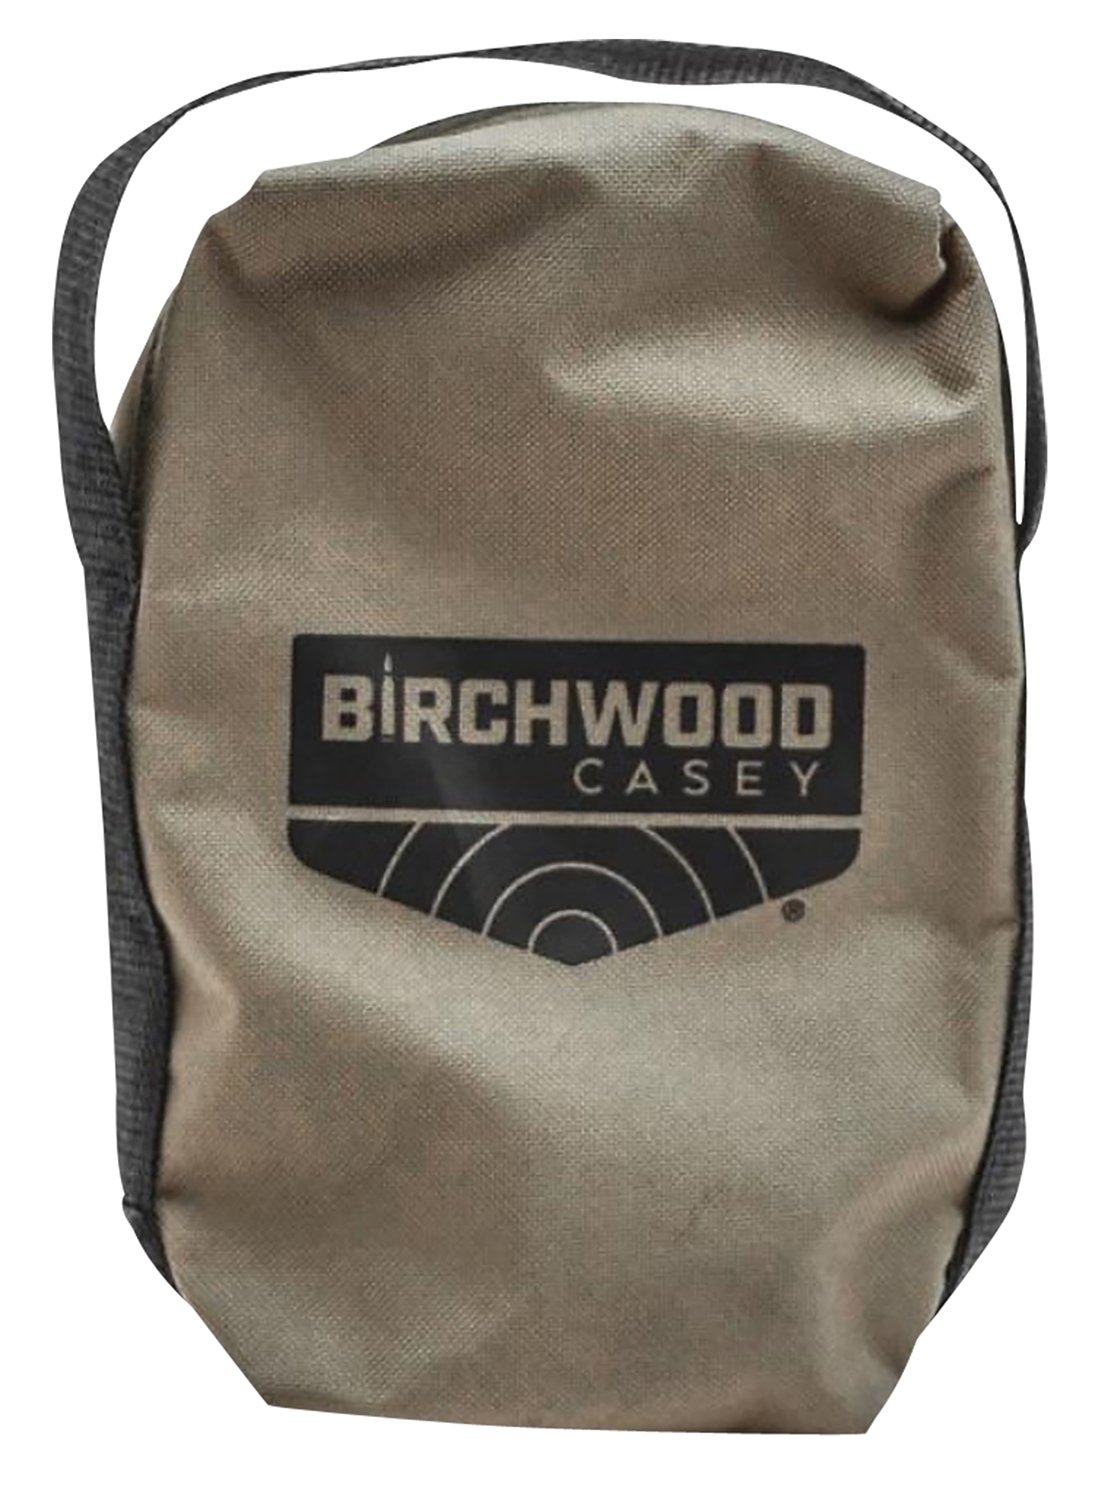 Birchwood Casey SRWB4PK Shooting Rest Weight Bag with Brown Finish, Holds 7lbs of Sand or 25lbs of Lead Shot & 5.50